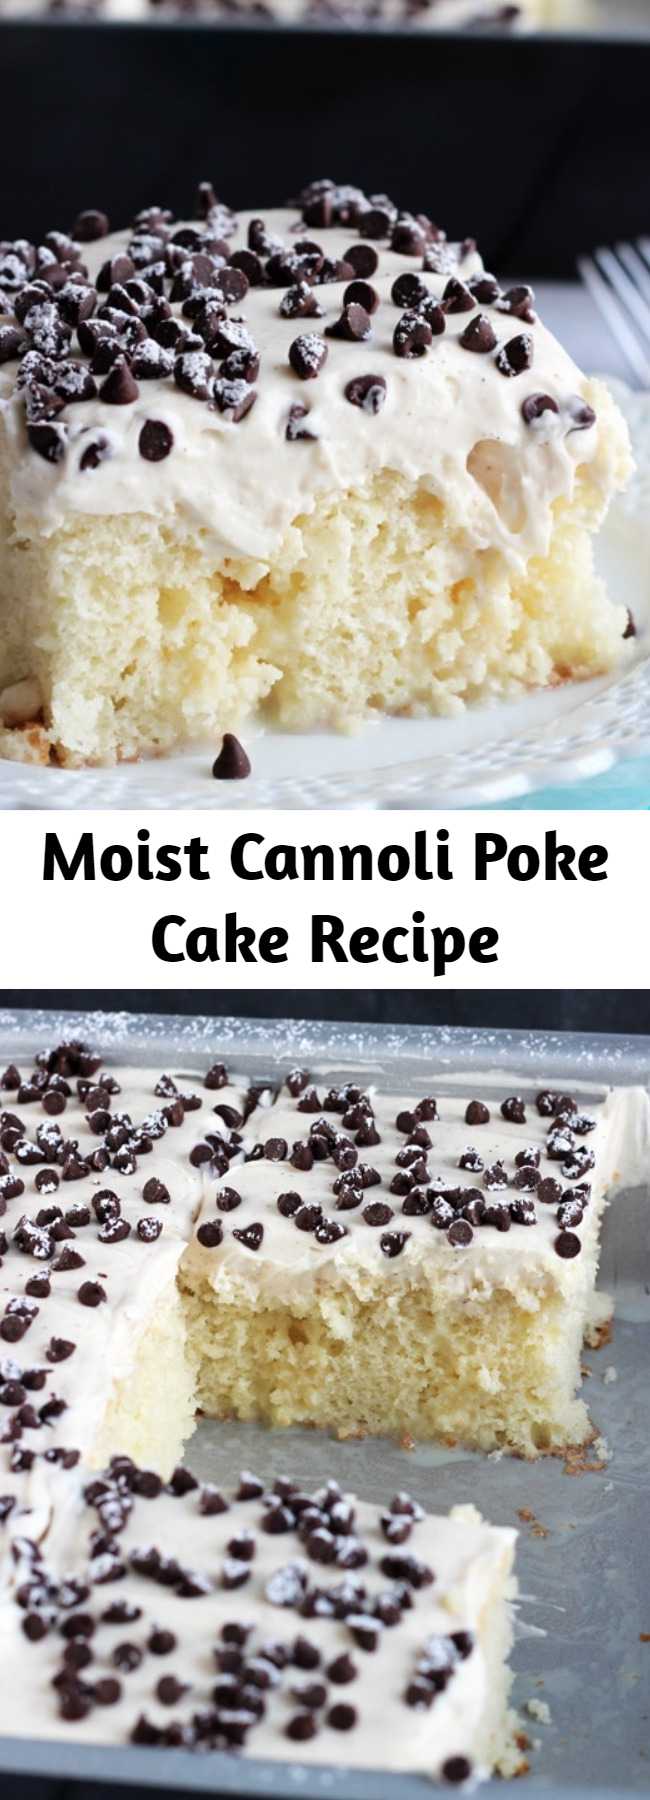 Moist Cannoli Poke Cake Recipe - This Cannoli Poke Cake is a lovely vanilla cake soaked with sweetened condensed milk and covered in sweet cannoli filling. It’s a moist, indulgent dessert that will rock your socks off!